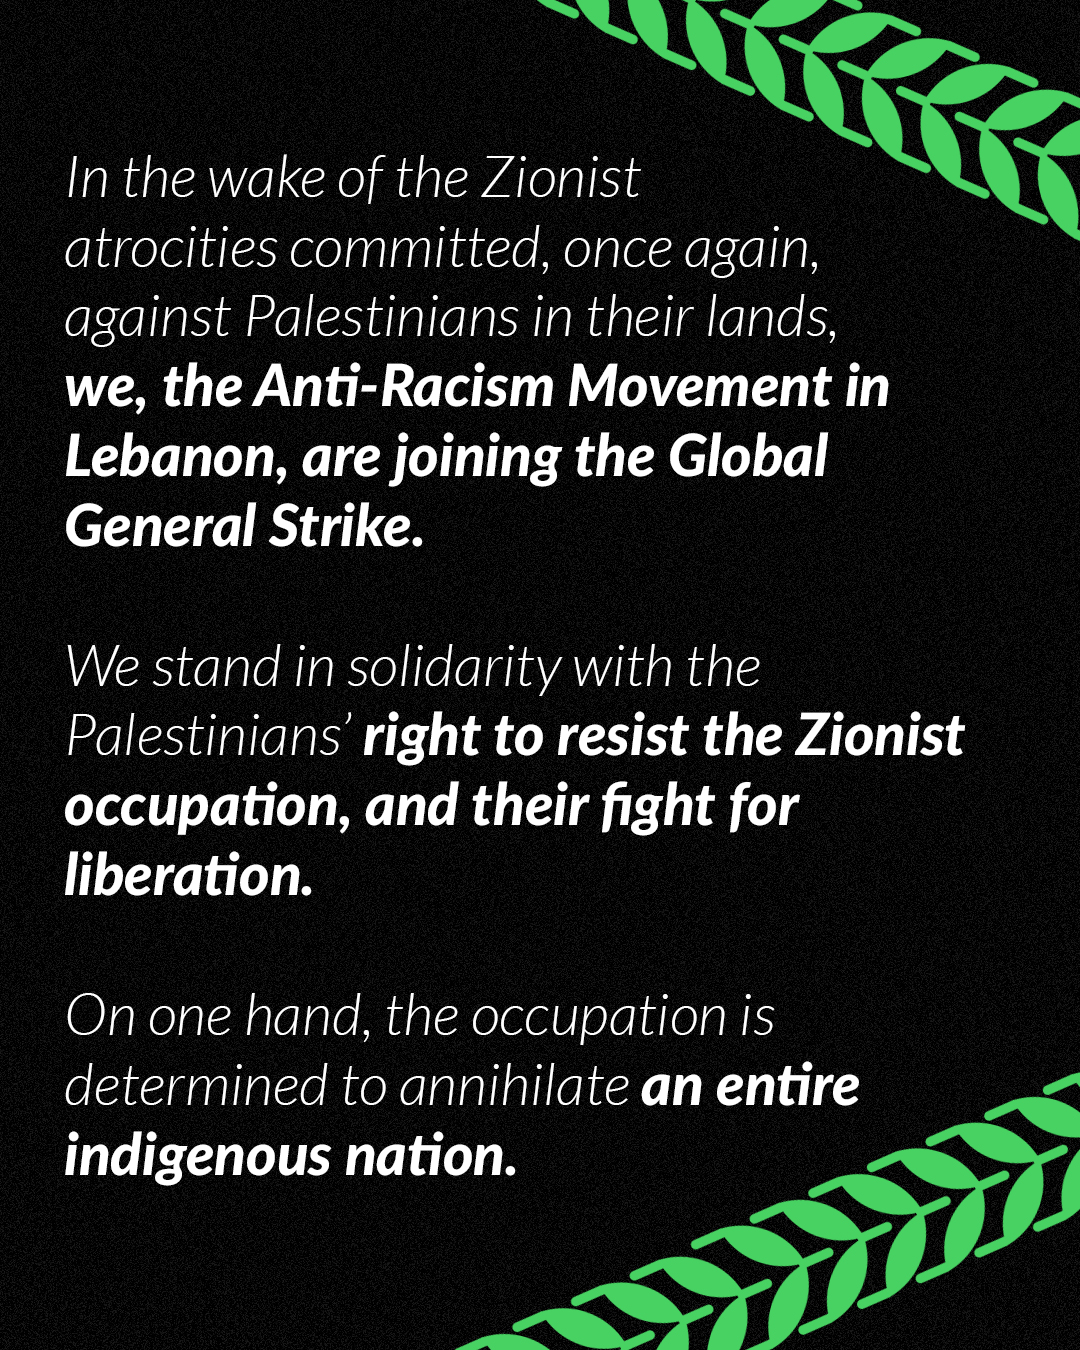 In the wake of the Zionist atrocities committed, once again, against Palestinians in their lands, we, the Anti-Racism Movement in Lebanon, are joining the Global General Strike. We stand in solidarity with the Palestinians’ right to resist the Zionist occupation, and their fight for liberation. On one hand, the occupation is determined to annihilate an entire indigenous nation.